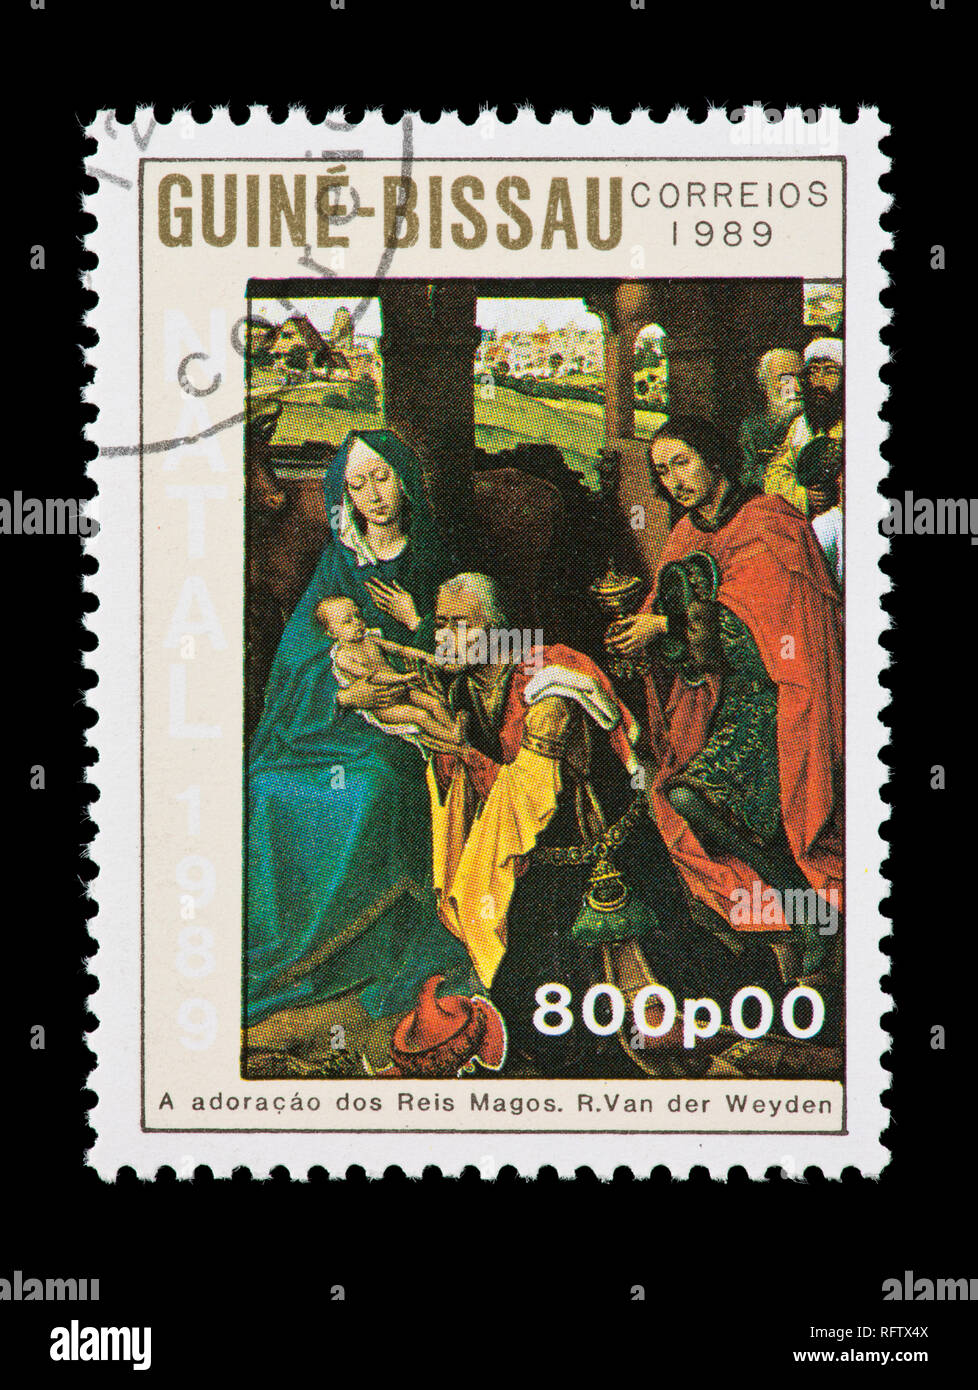 Postage stamp from Guinea -Bissau depicting Madonna and Child painting by Van der Weyden. Stock Photo